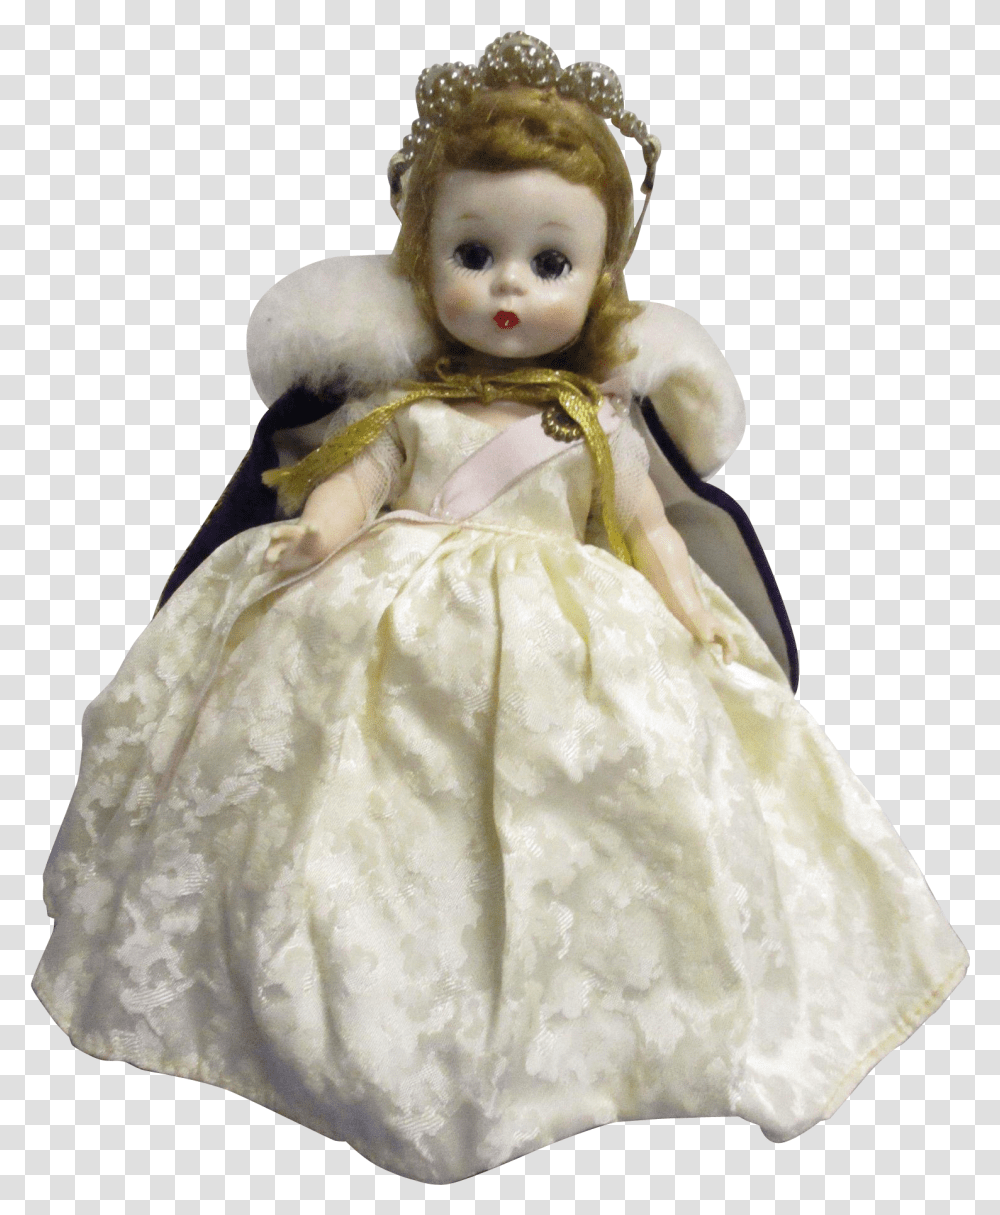 Doll, Toy, Figurine, Wedding Gown, Robe Transparent Png